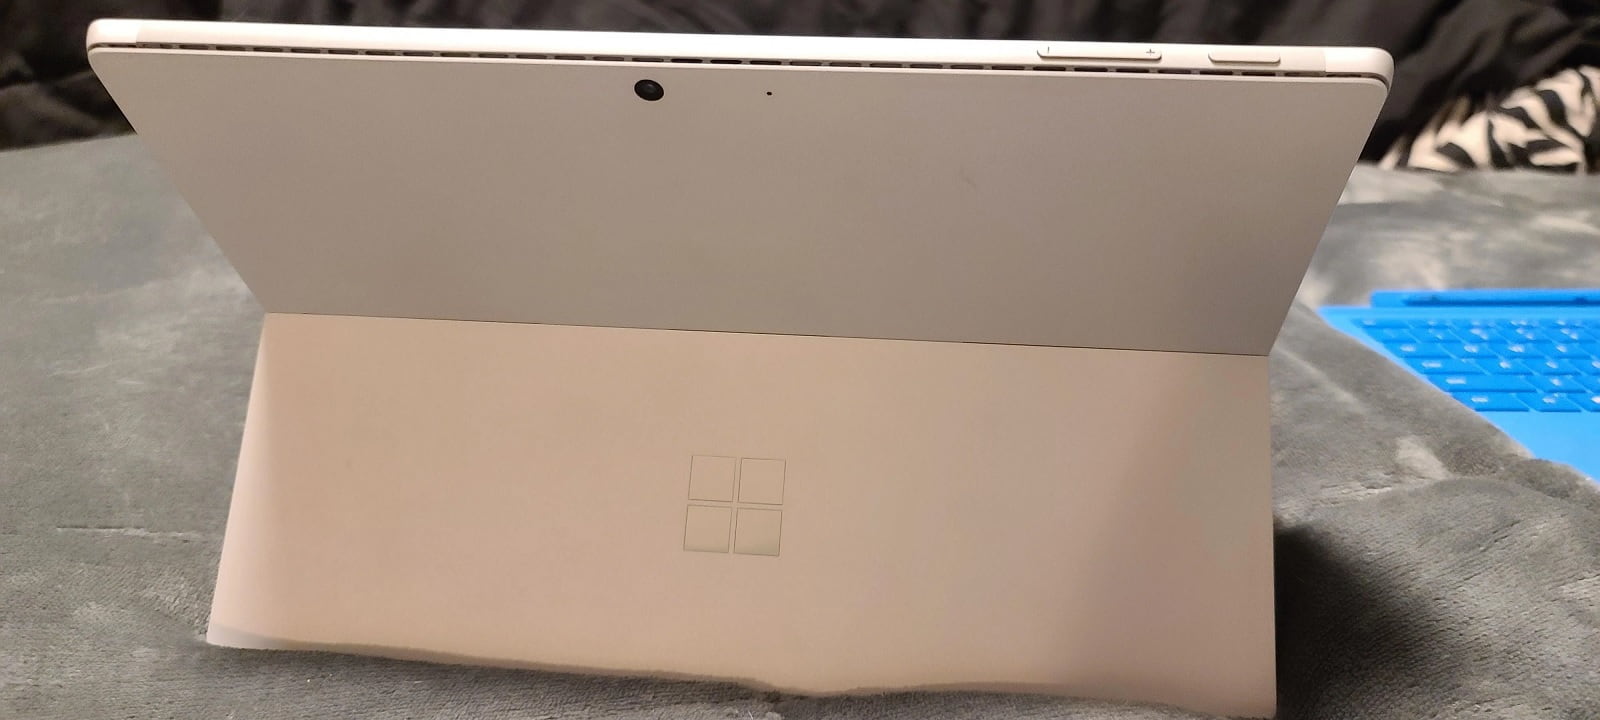 Surface Pro 8 prototype leaks again with better specs, but no new design